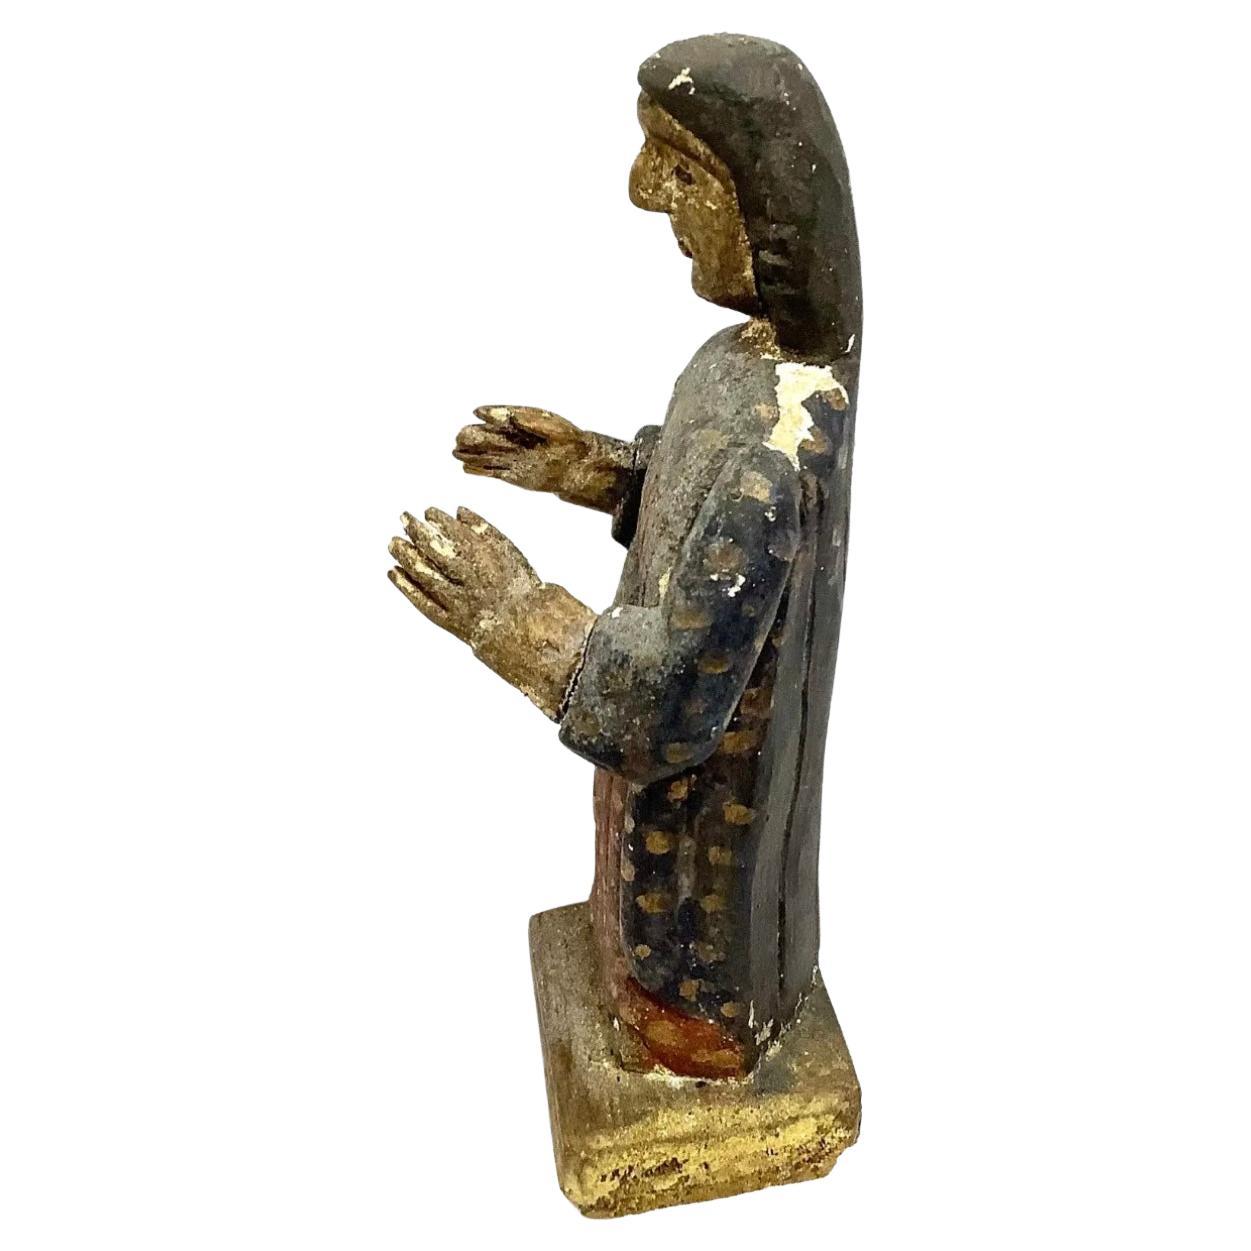 Unique hand carved antique Spanish colonial wooden santo.